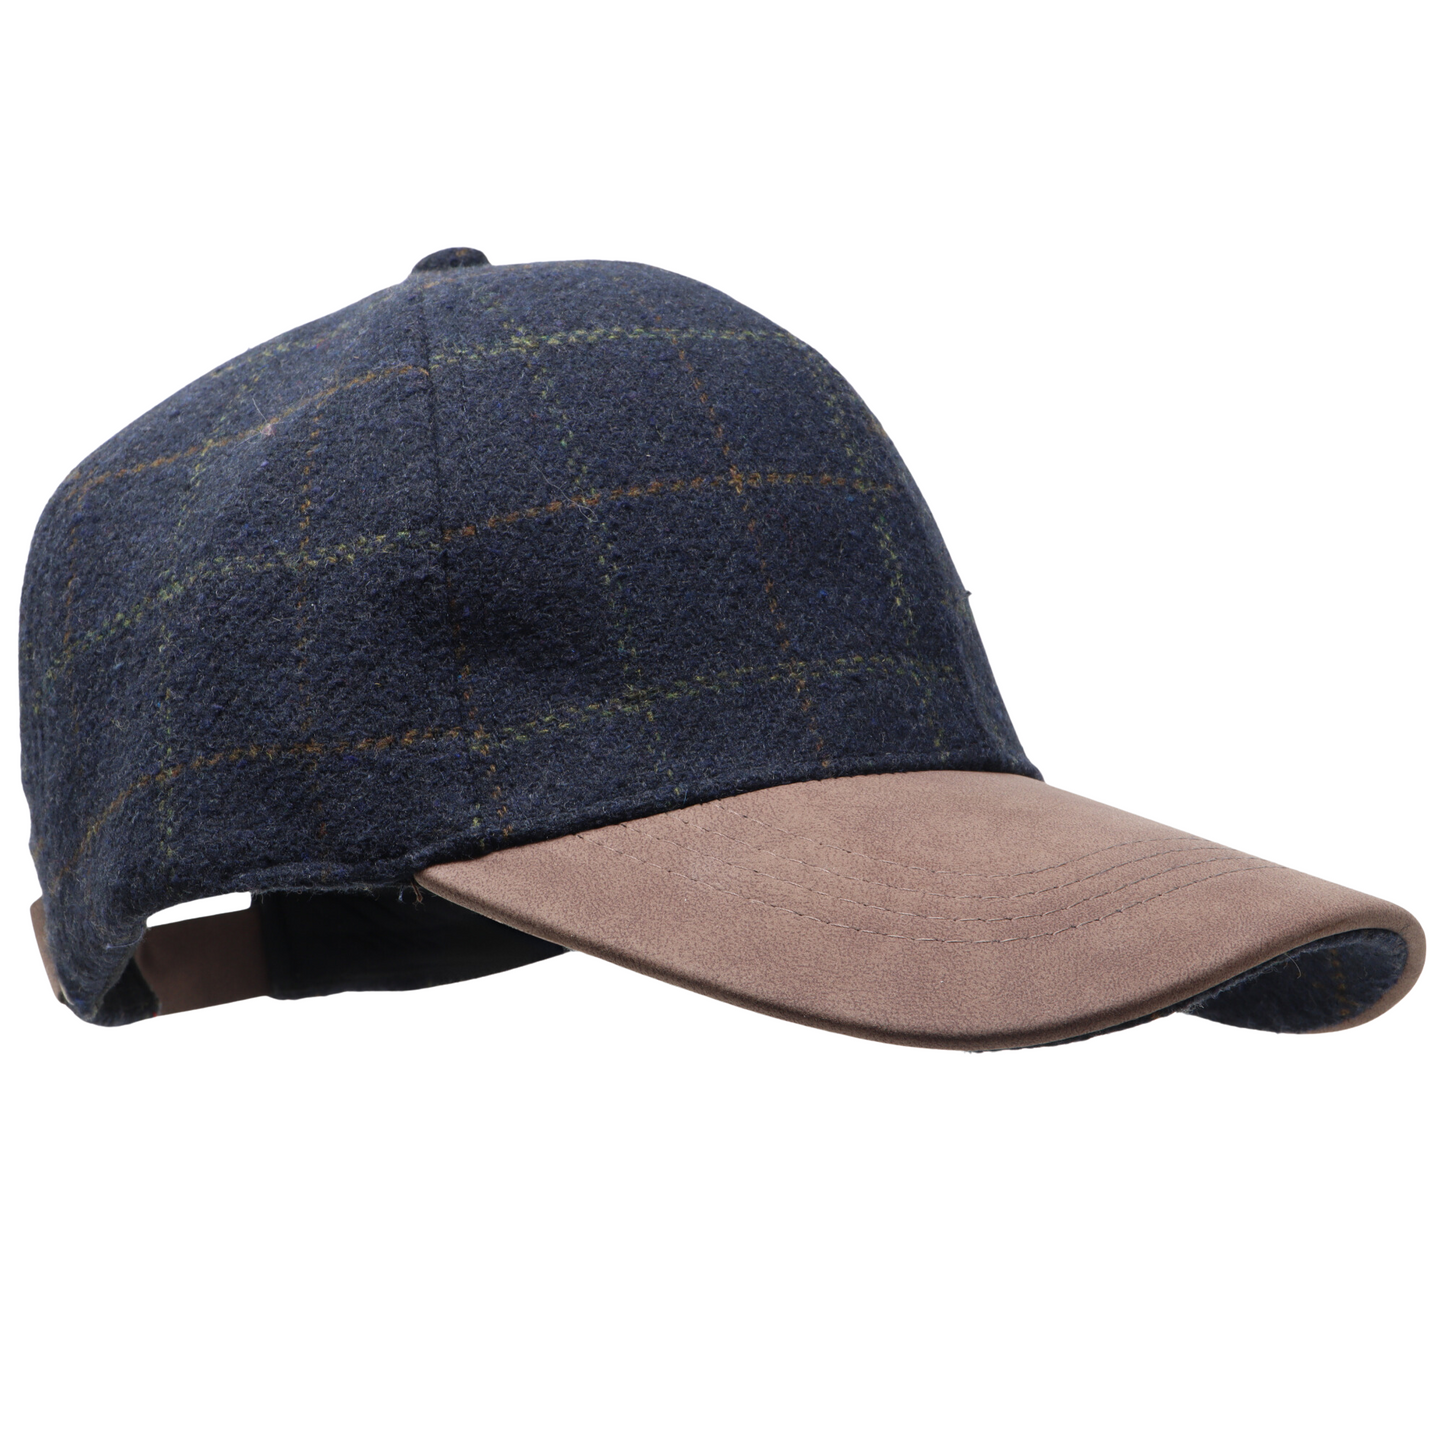 Check Baseball Cap with a Suede Peak